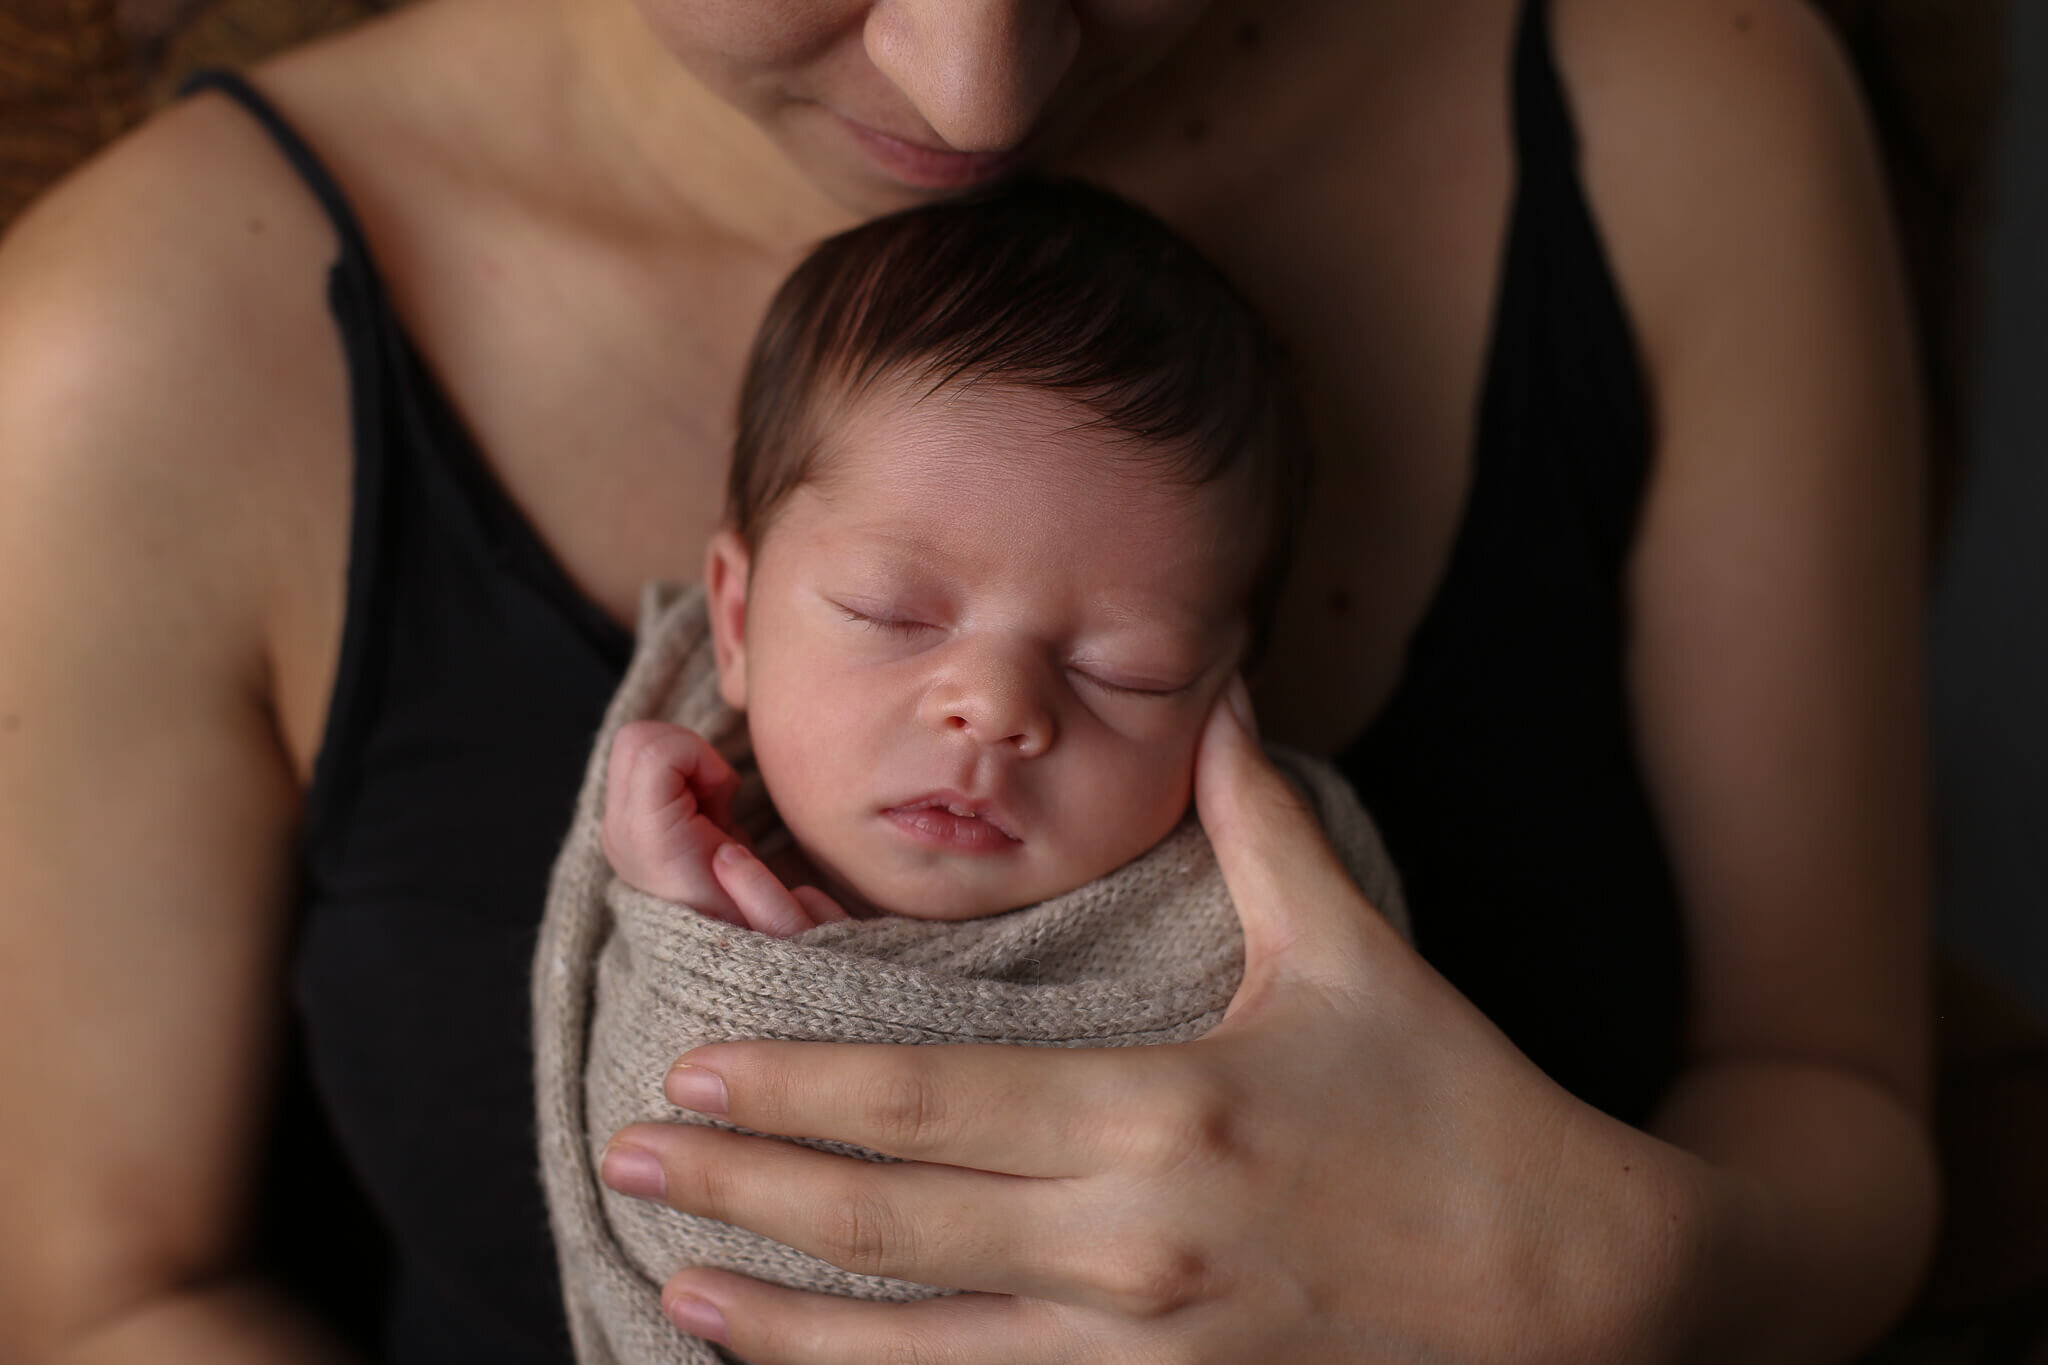  A picture of a peacefully sleeping newborn wrapped in a knitted blanket with its tiny hands peeking up near its face as mom holds the baby close to her chest from a newborn photo session 